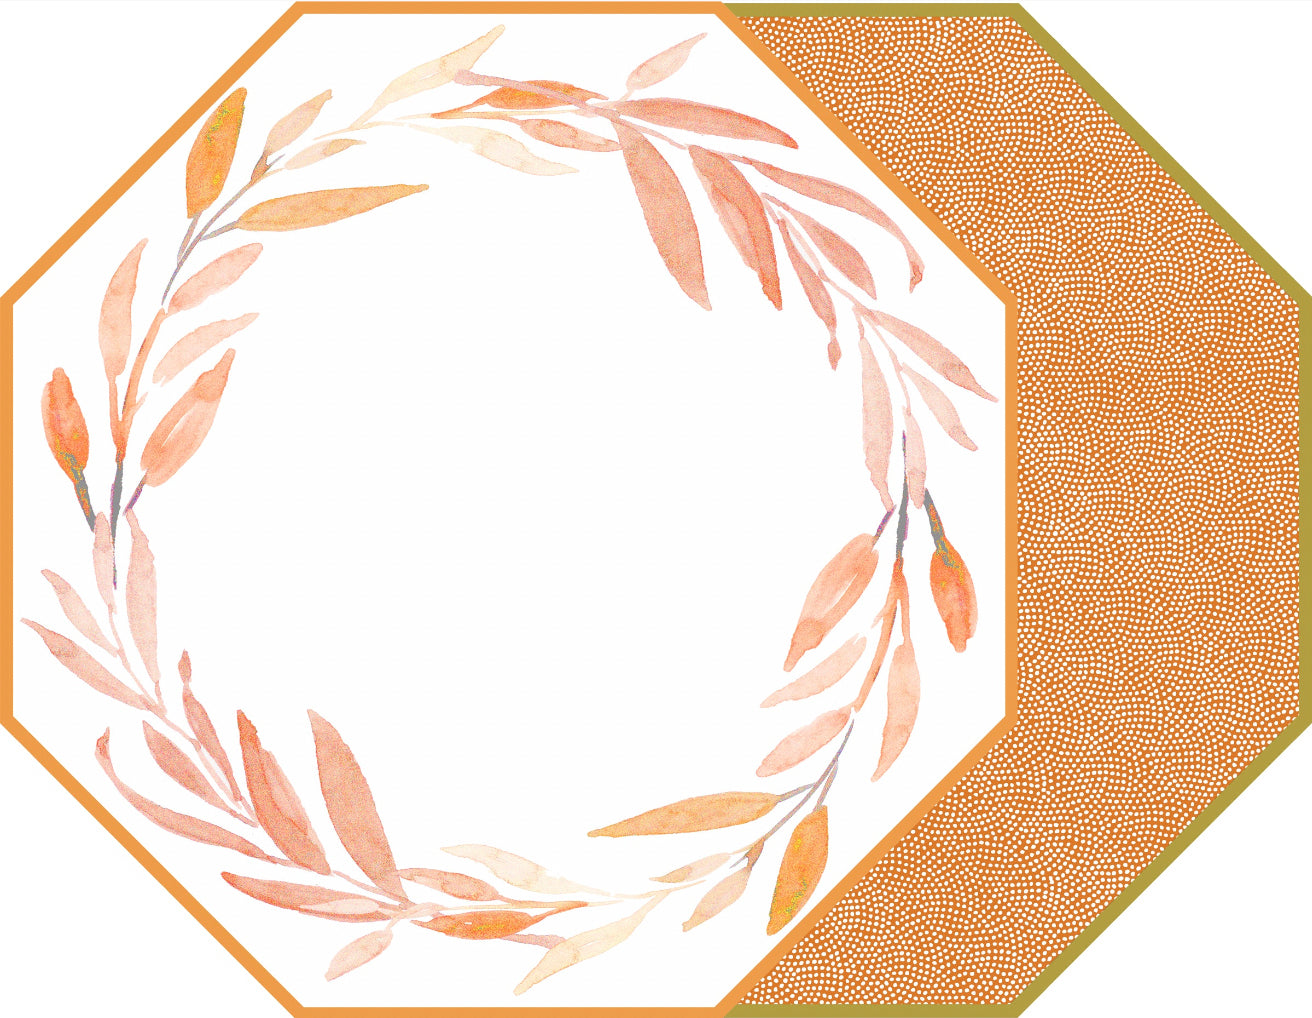 OCTAGONAL TWO SIDED LEAVES WREATH PLACEMAT WITH DOT FAN ~ PAPRIKA